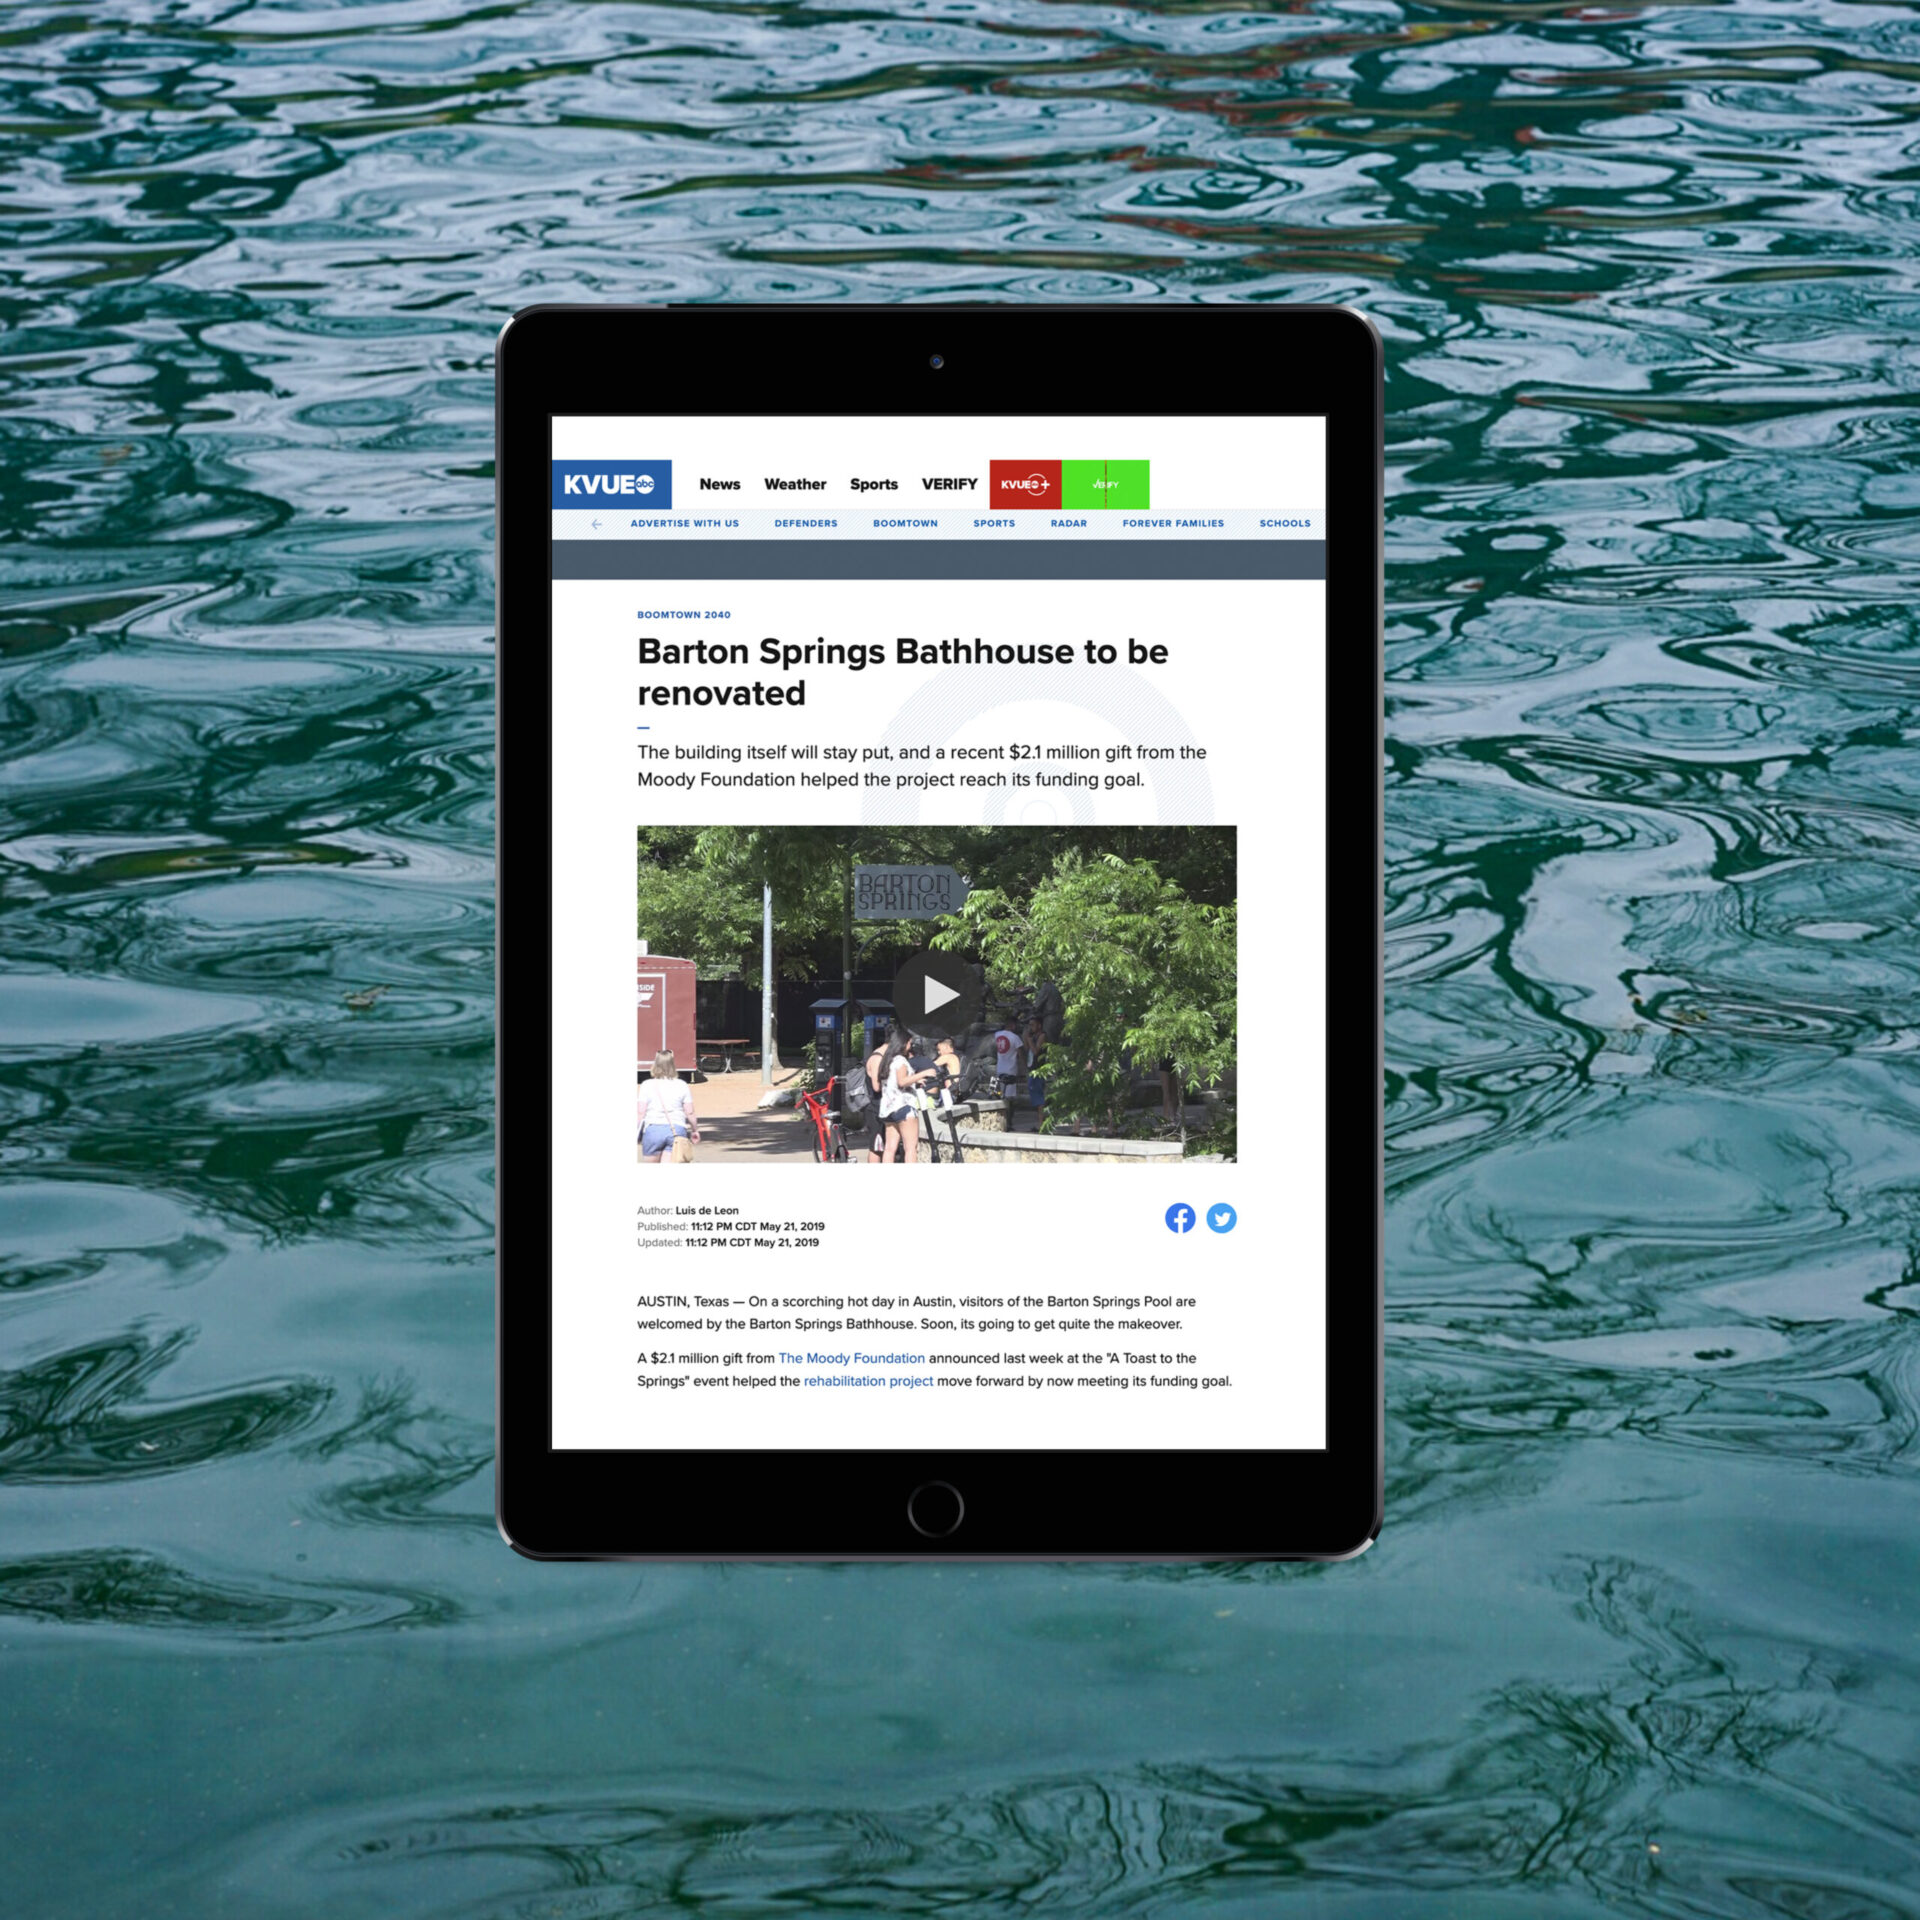 Barton Springs bathhouse to be renovated press coverage mock up over image of water